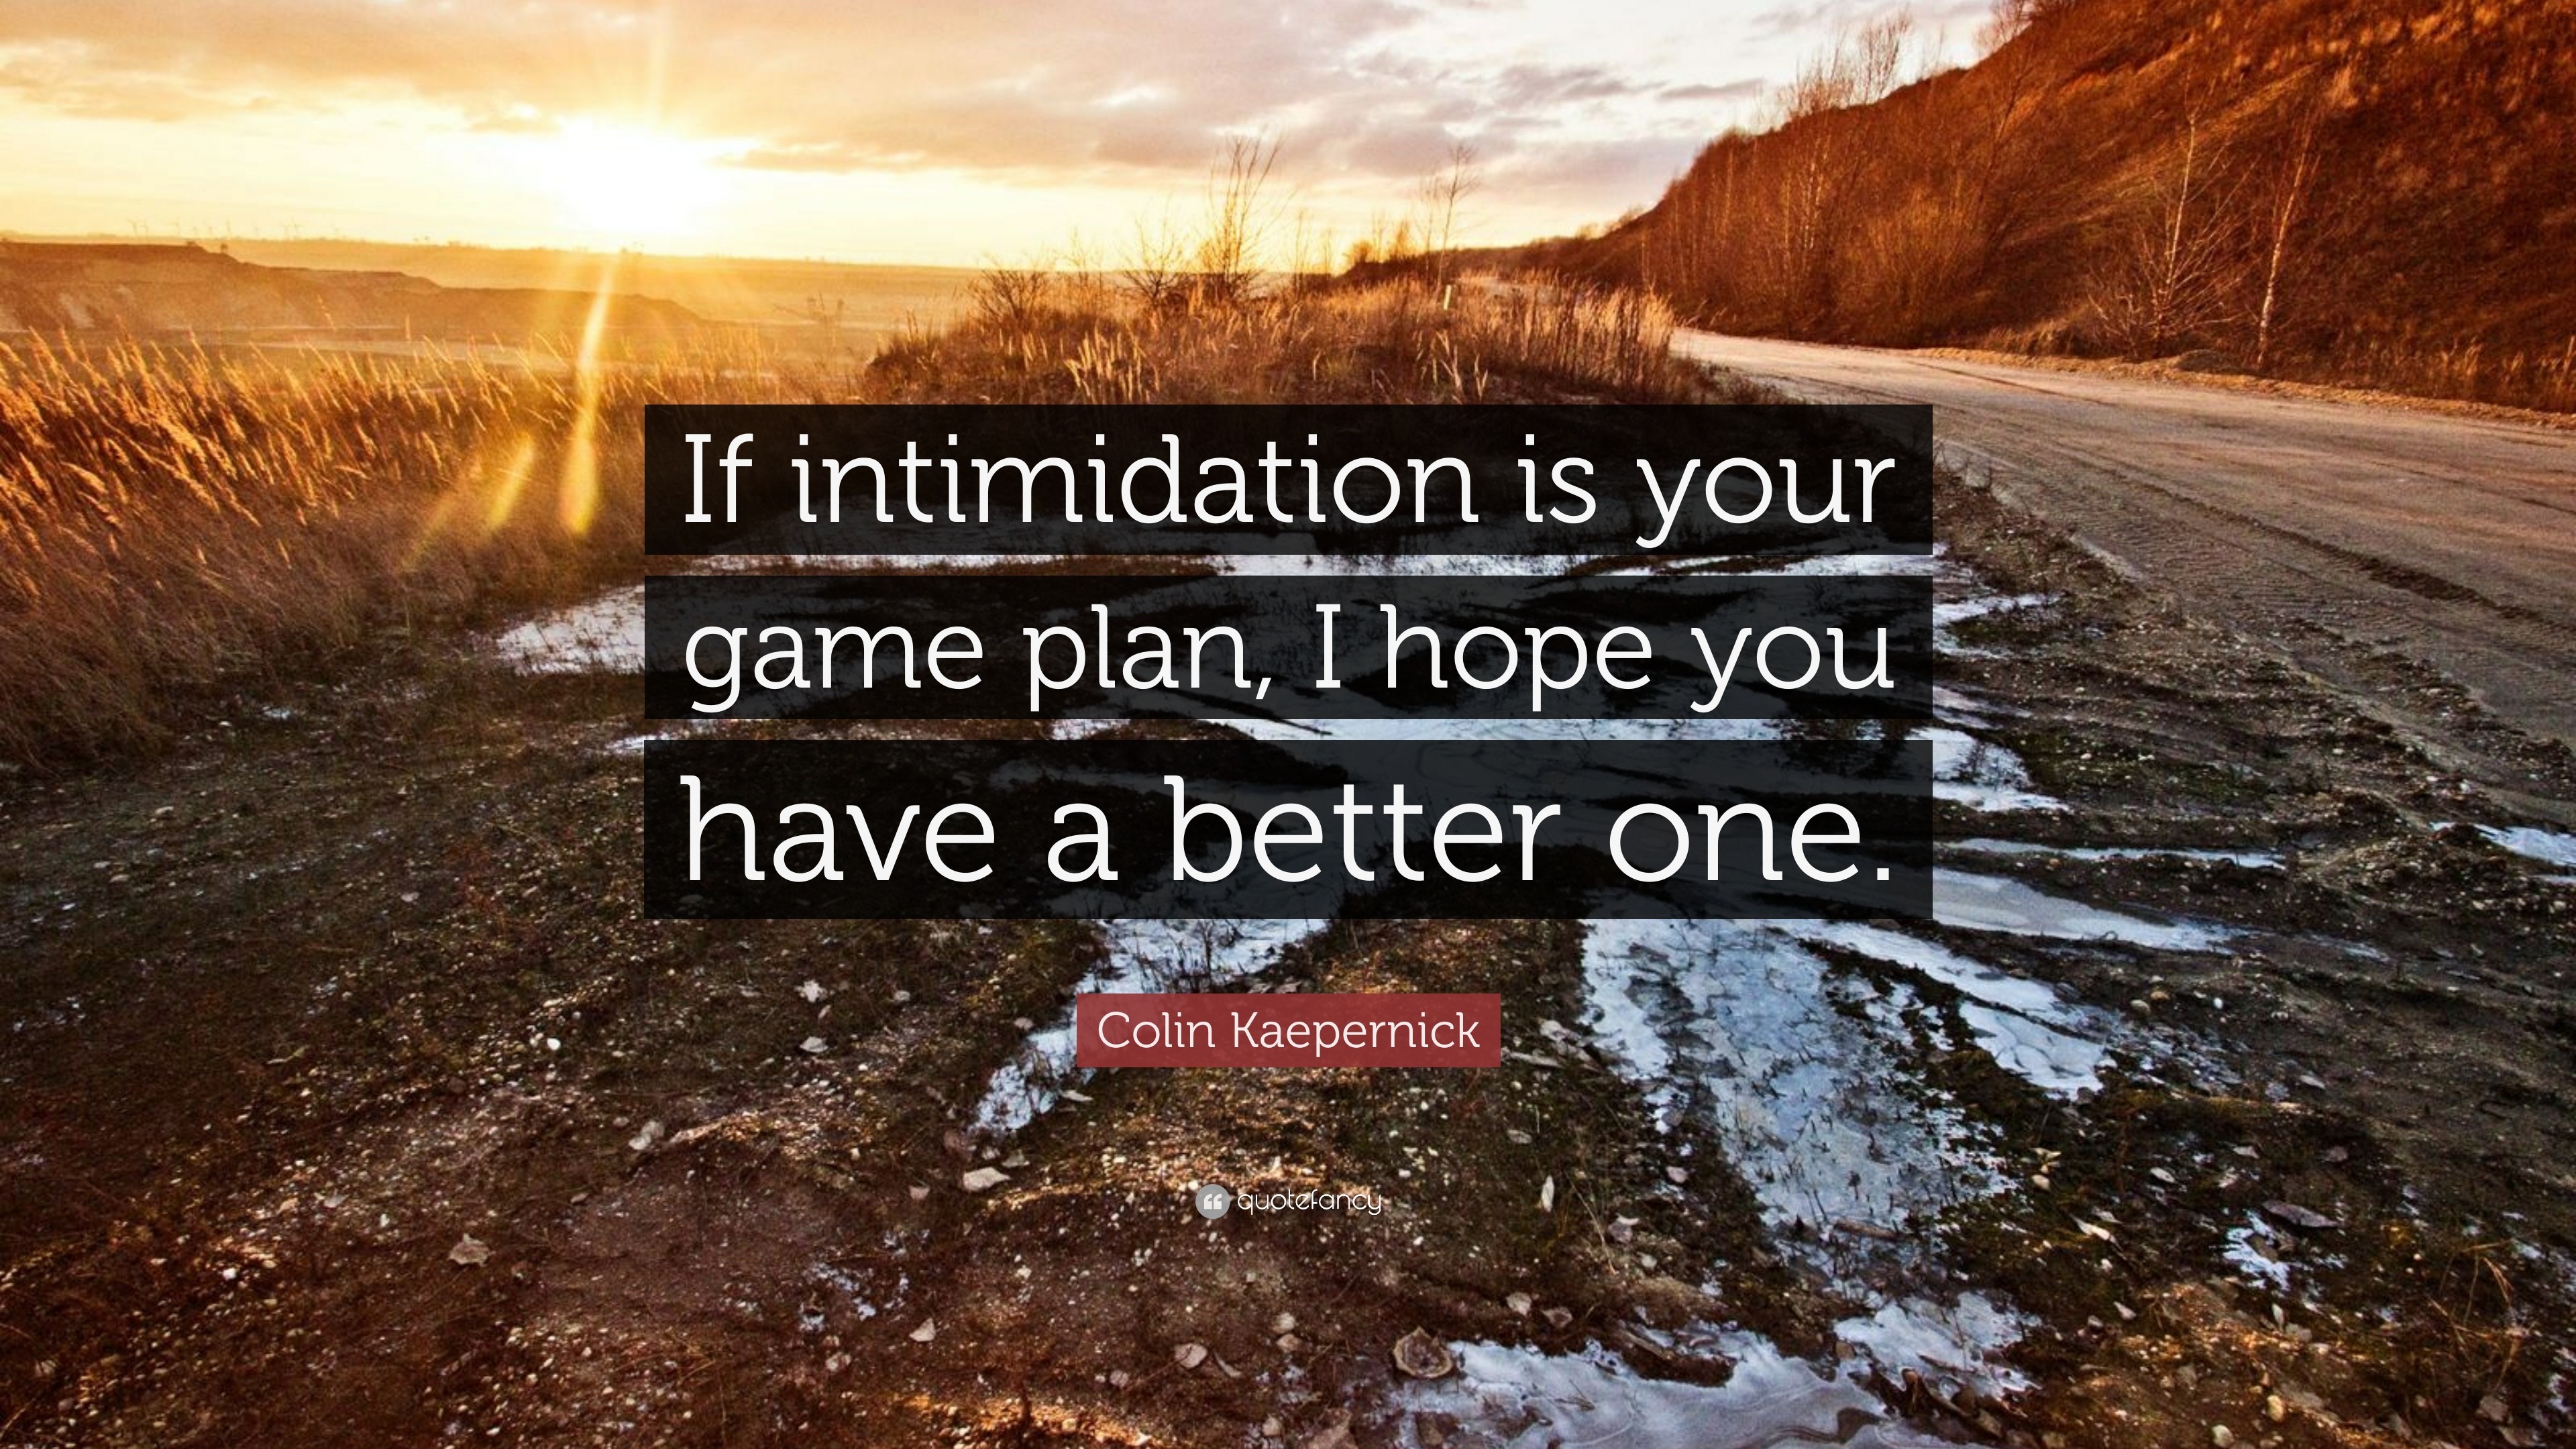 3840x2160 Colin Kaepernick Quote: “If intimidation is your game plan, I hope you have